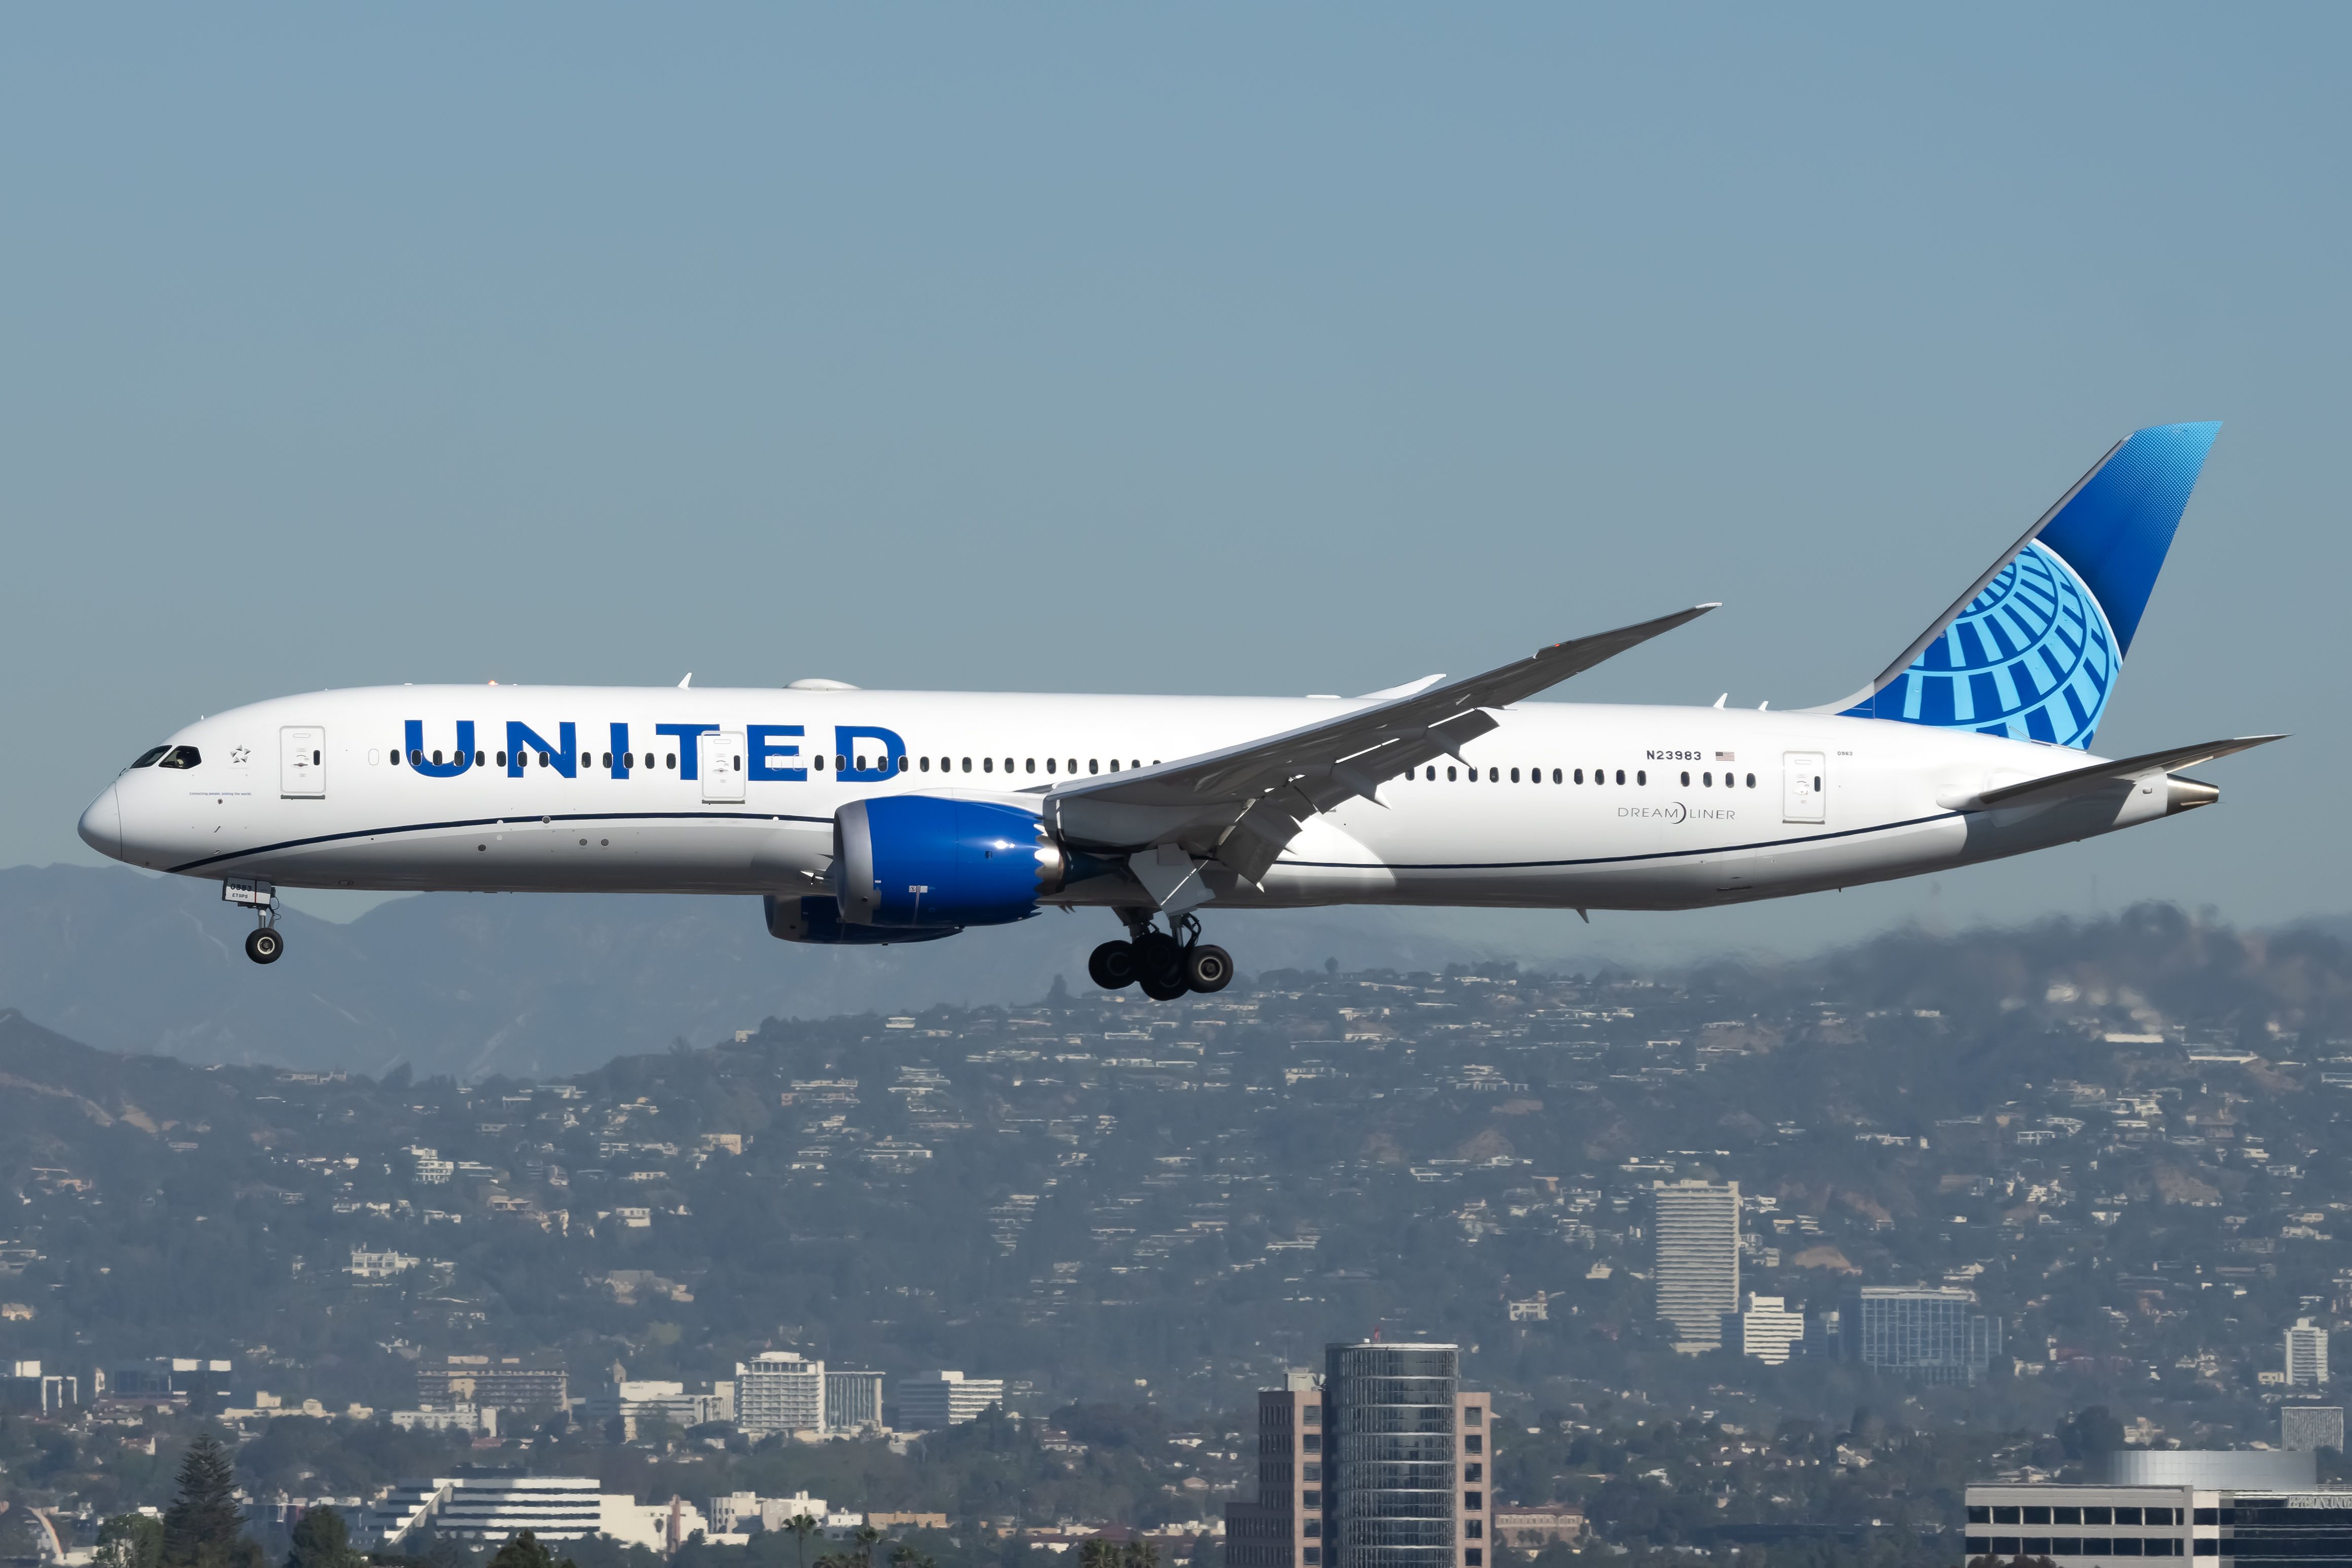 United Airlines Boeing 787-9 Dreamliner landing at LAX